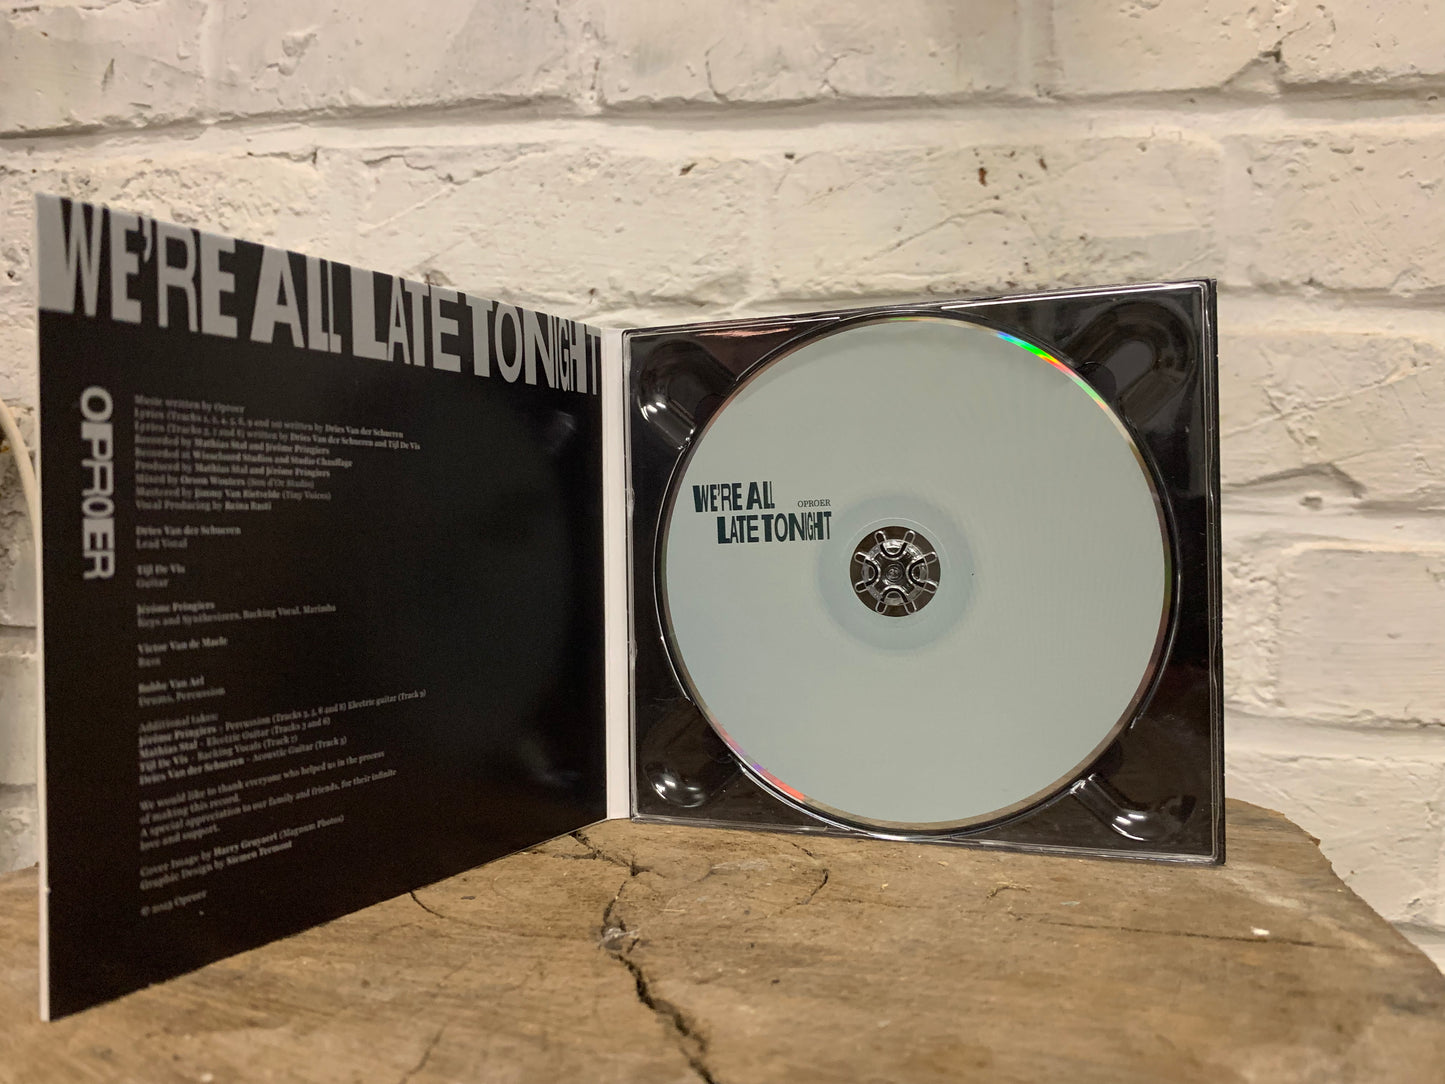 CD “We’re All Late Tonight”